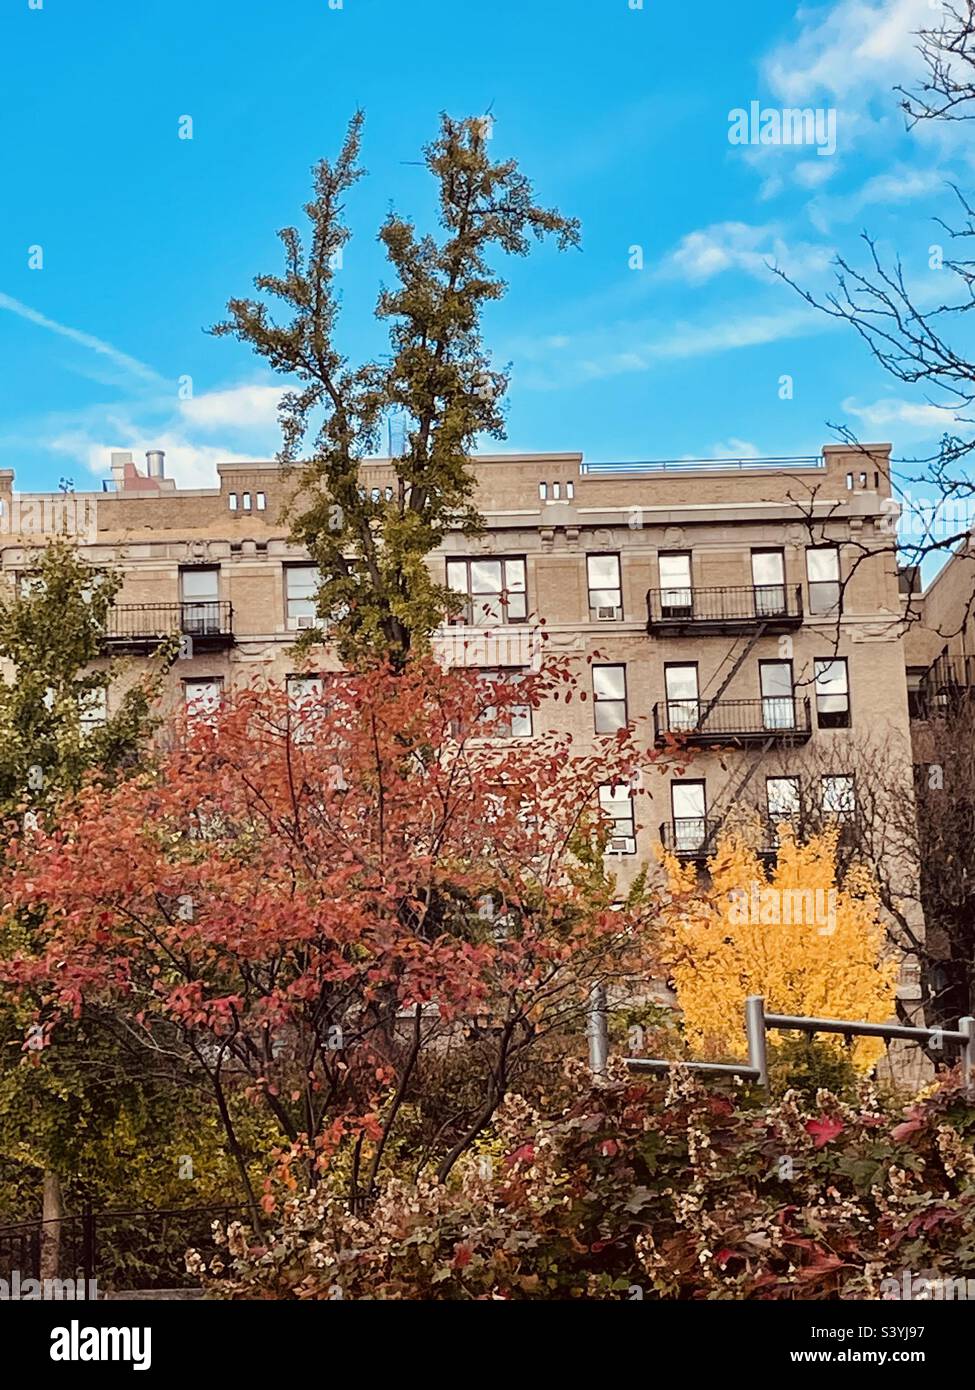 The change of seasons in Central Park facing north toward a brownstone building in New York City, Stock Photo